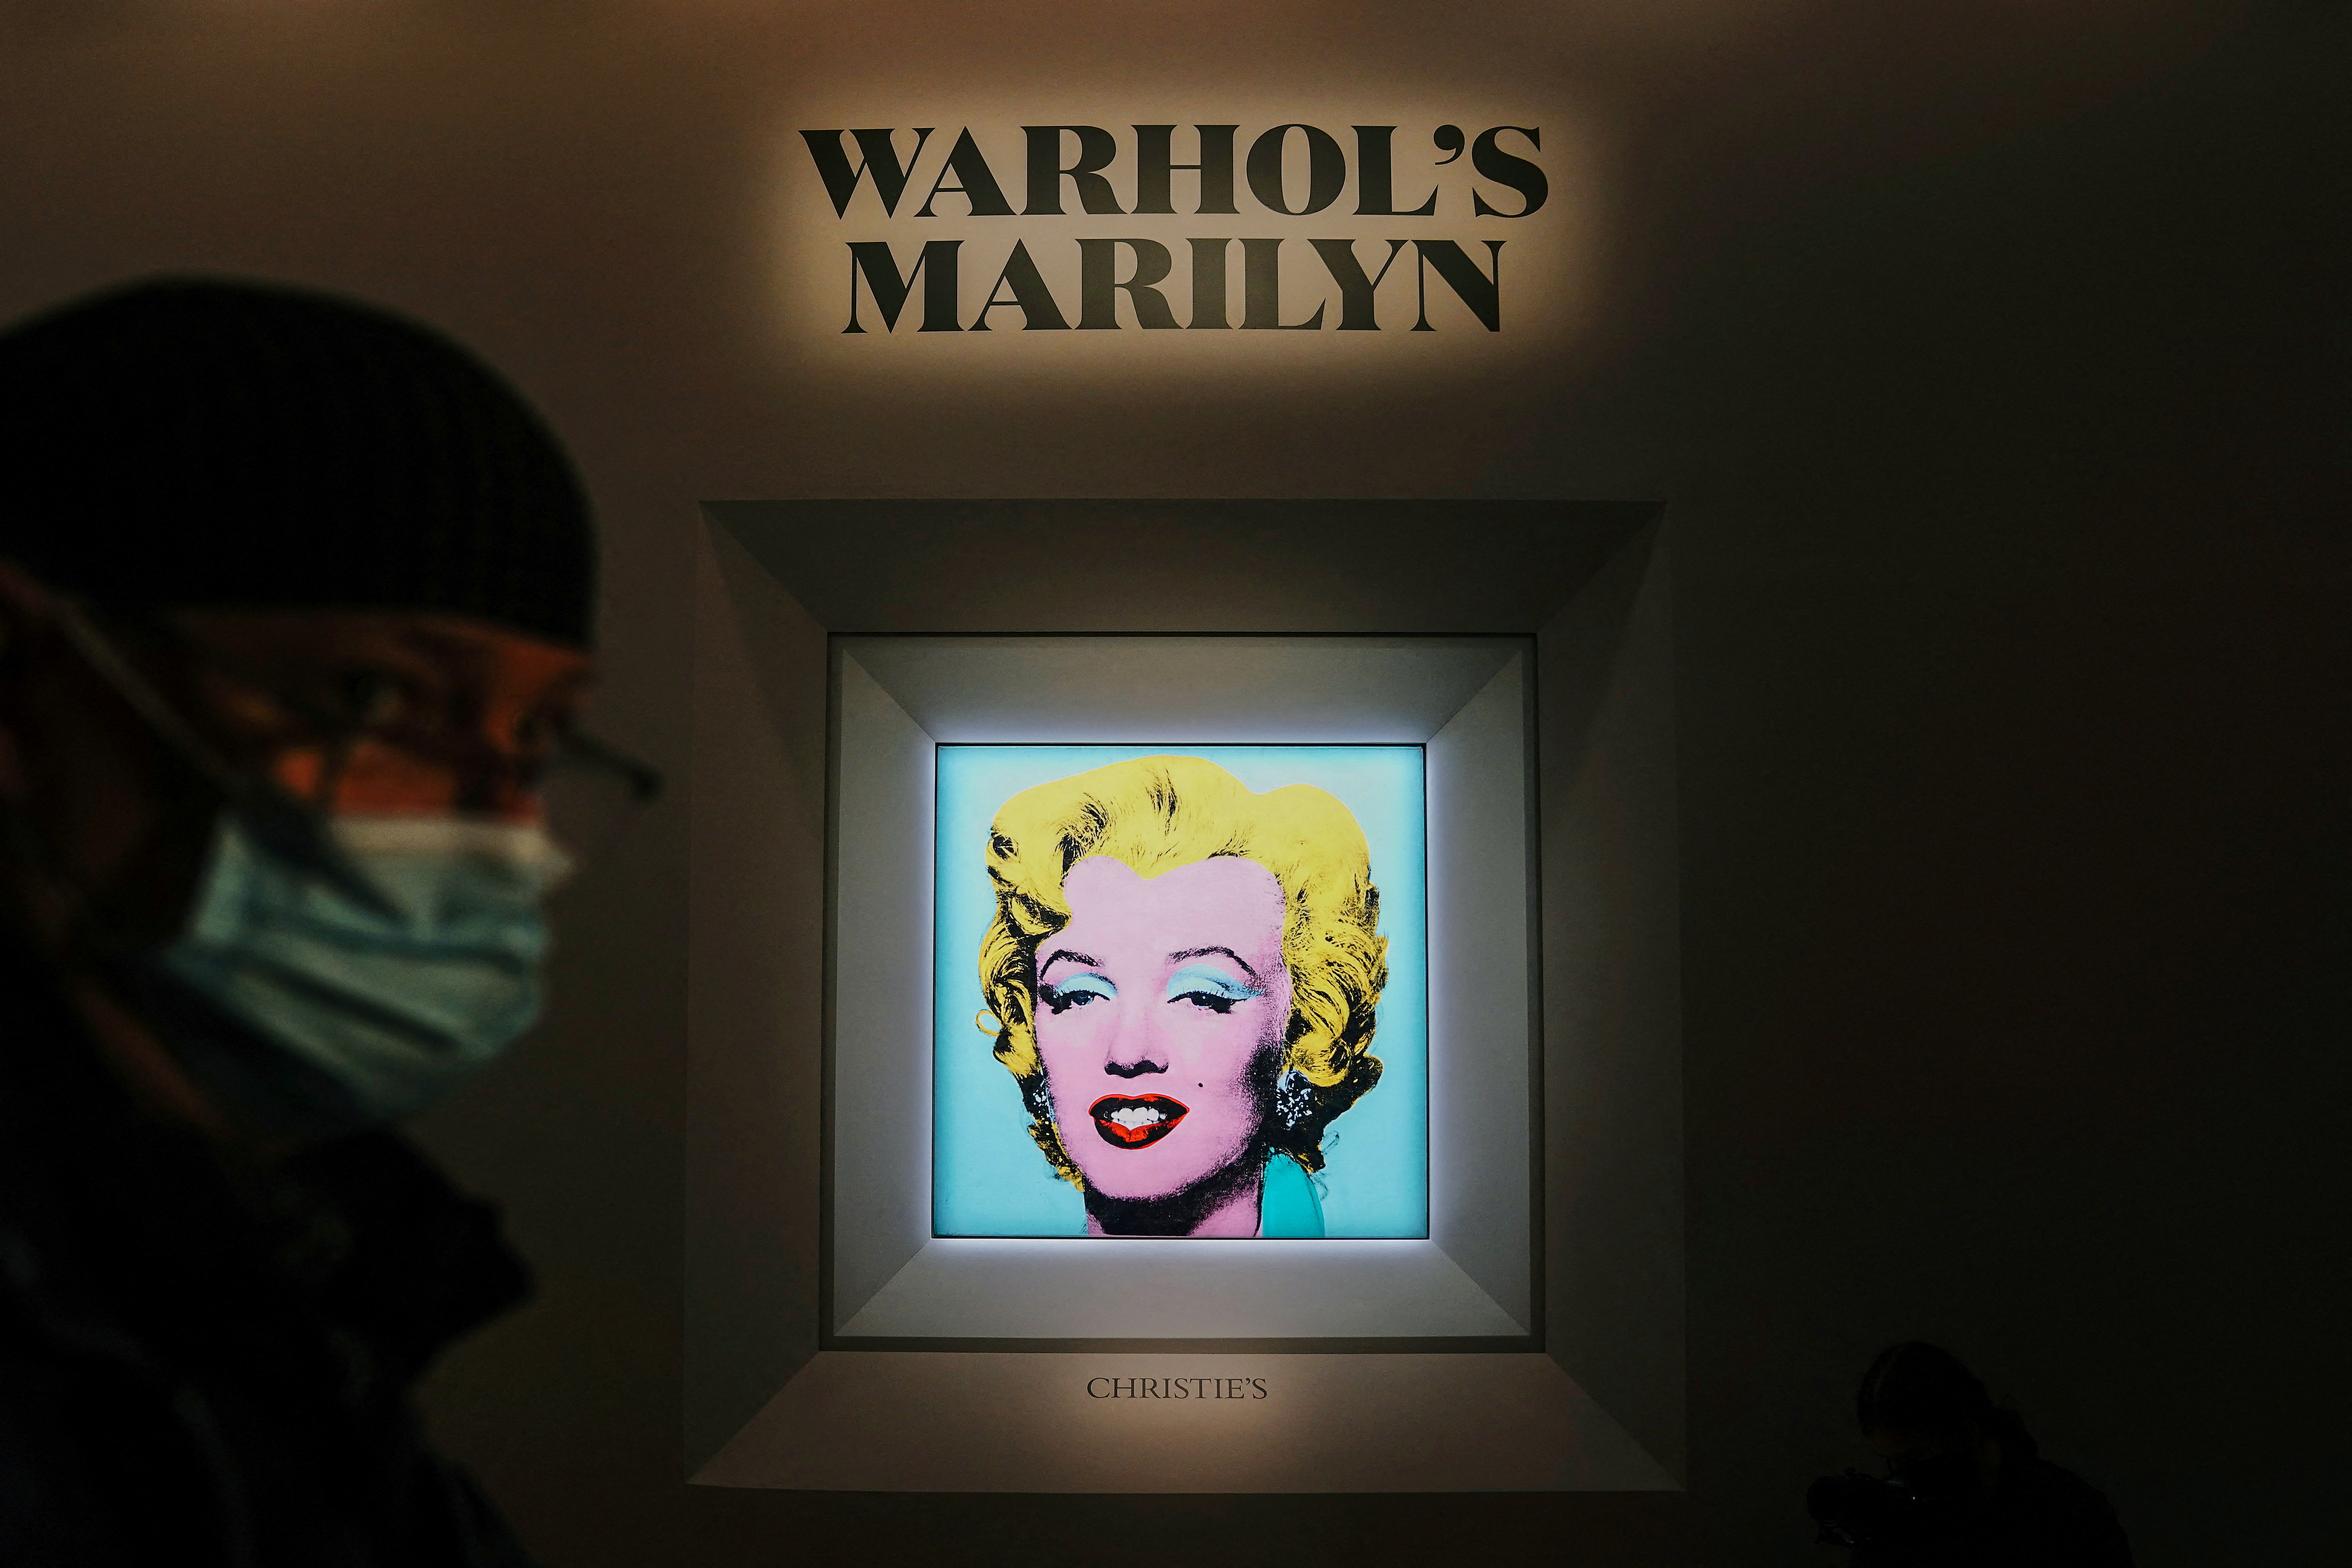 Andy Warhol auction in New York City